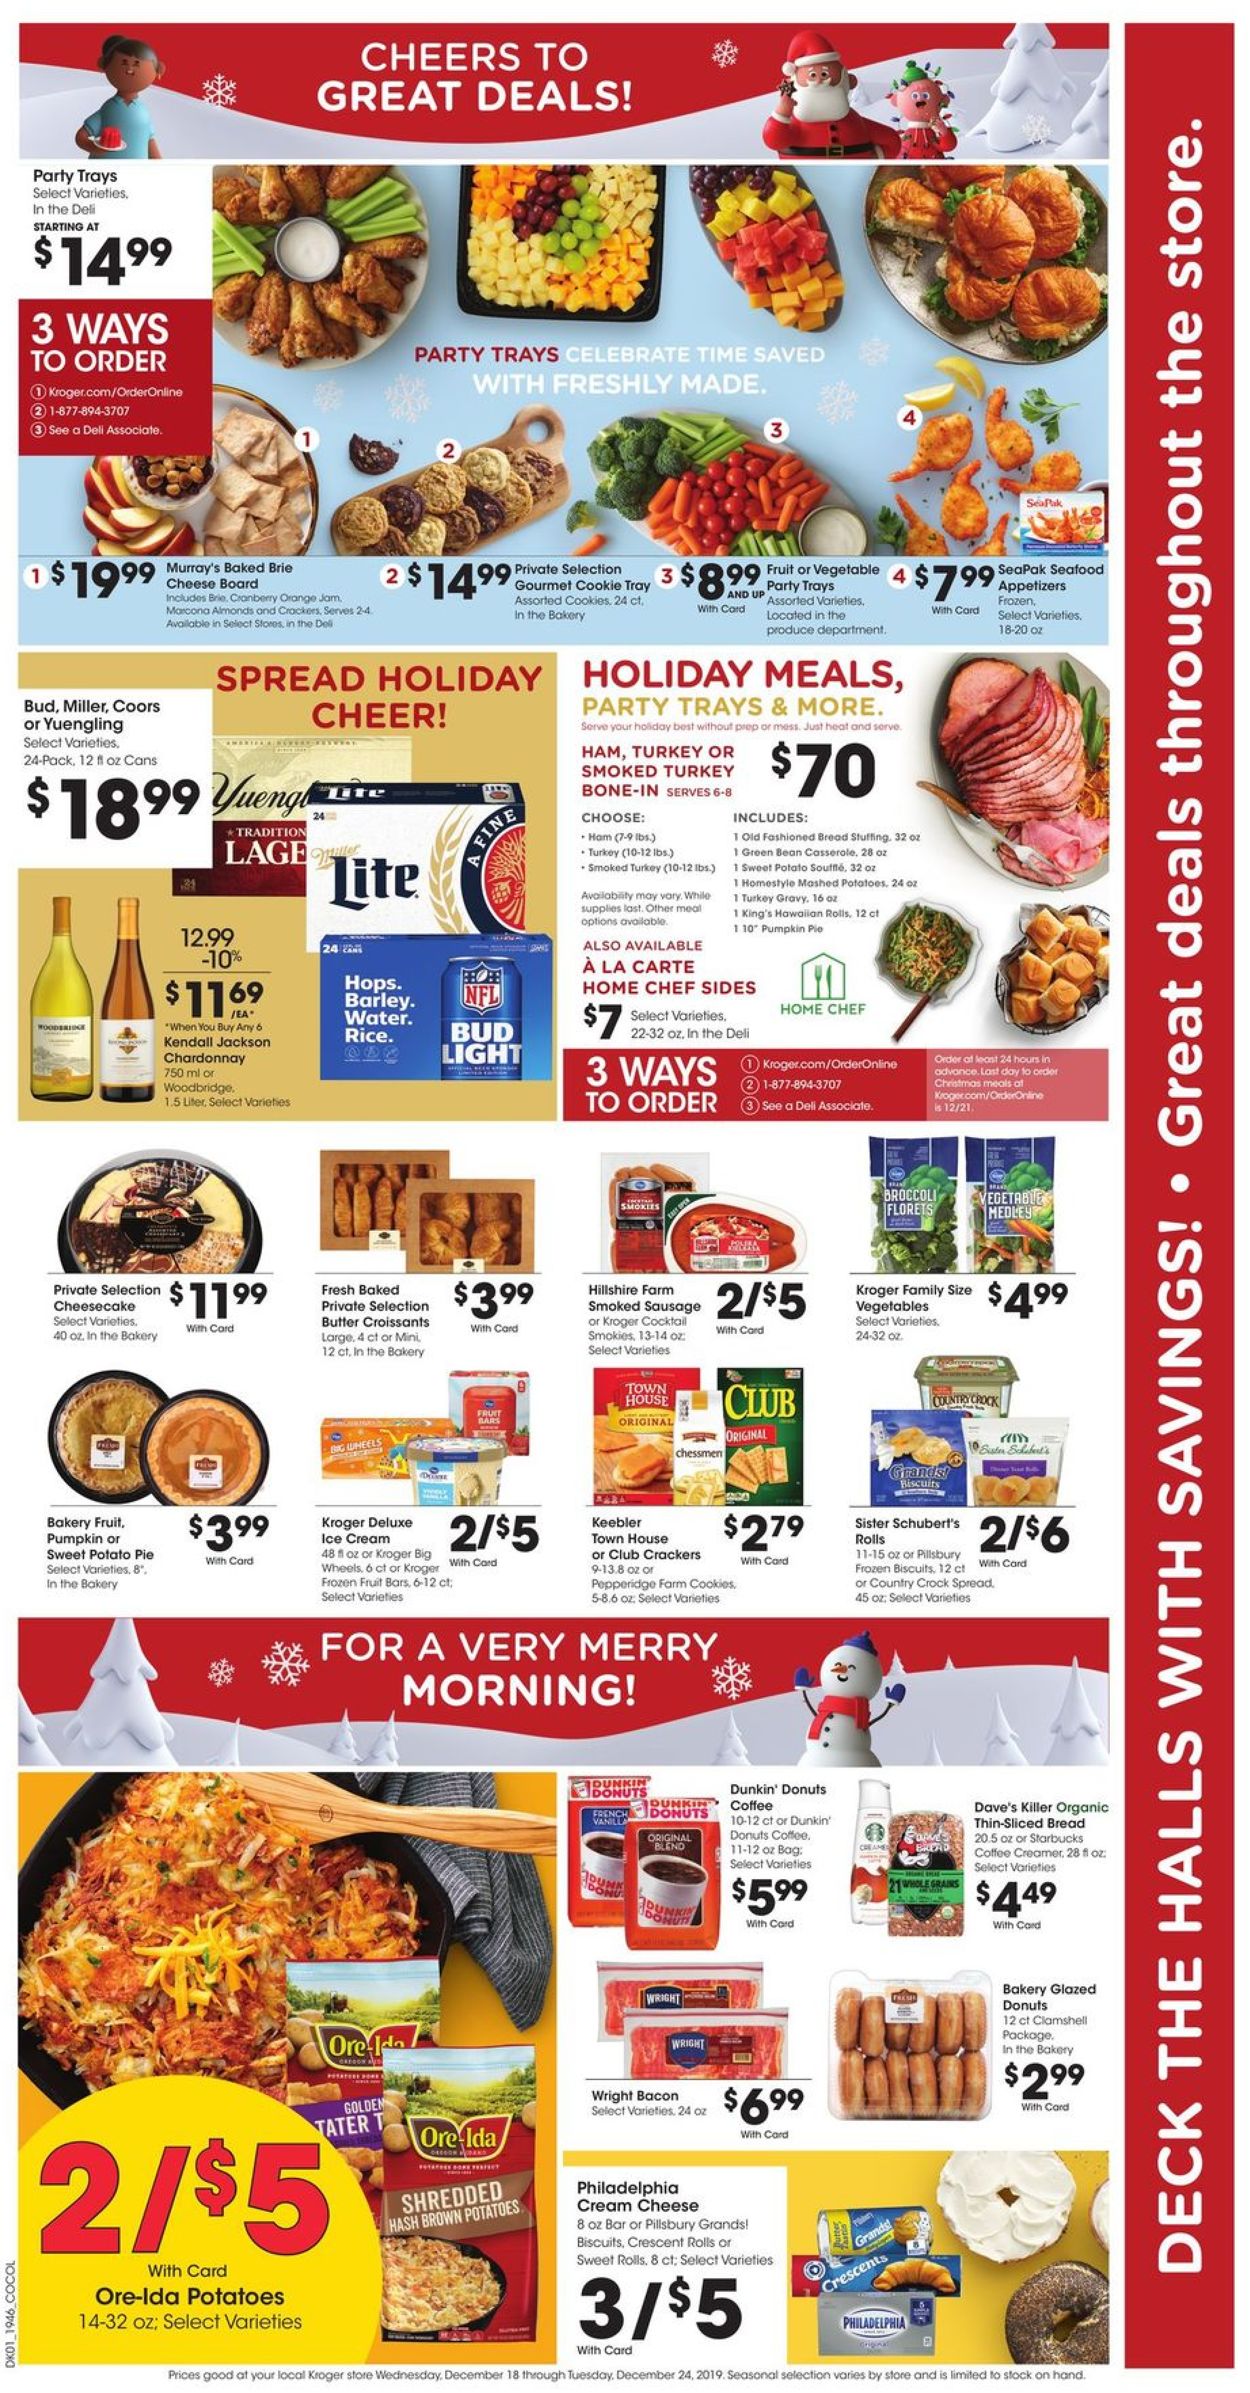 Kroger Christmas Meals To Go Kroger Hours Christmas Eve Christmas Day